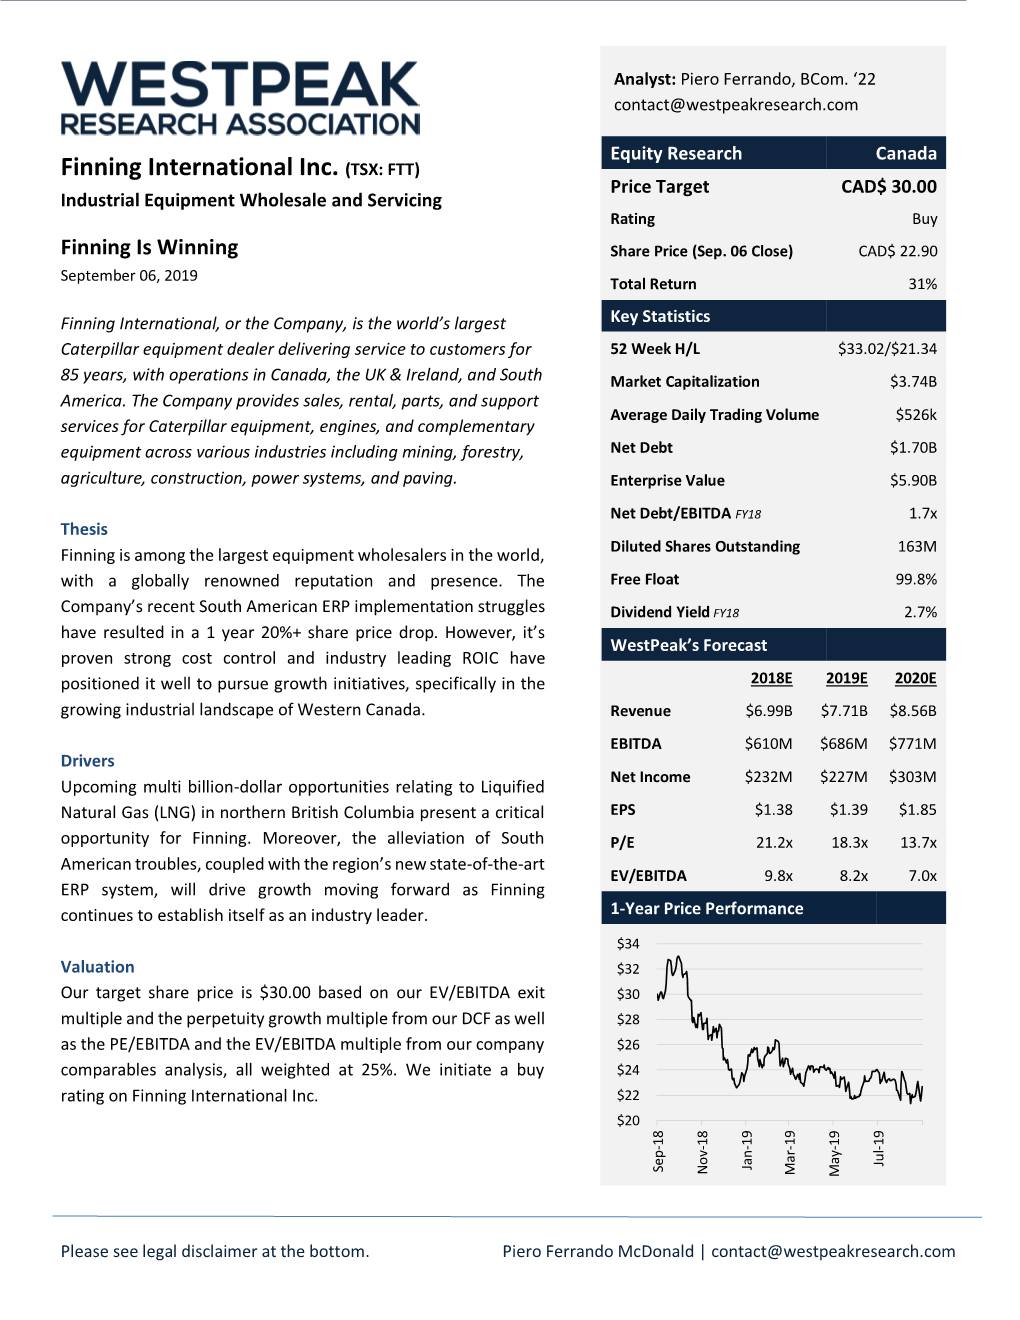 Finning International Inc. (TSX: FTT) Price Target CAD$ 30.00 Industrial Equipment Wholesale and Servicing Rating Buy Finning Is Winning Share Price (Sep